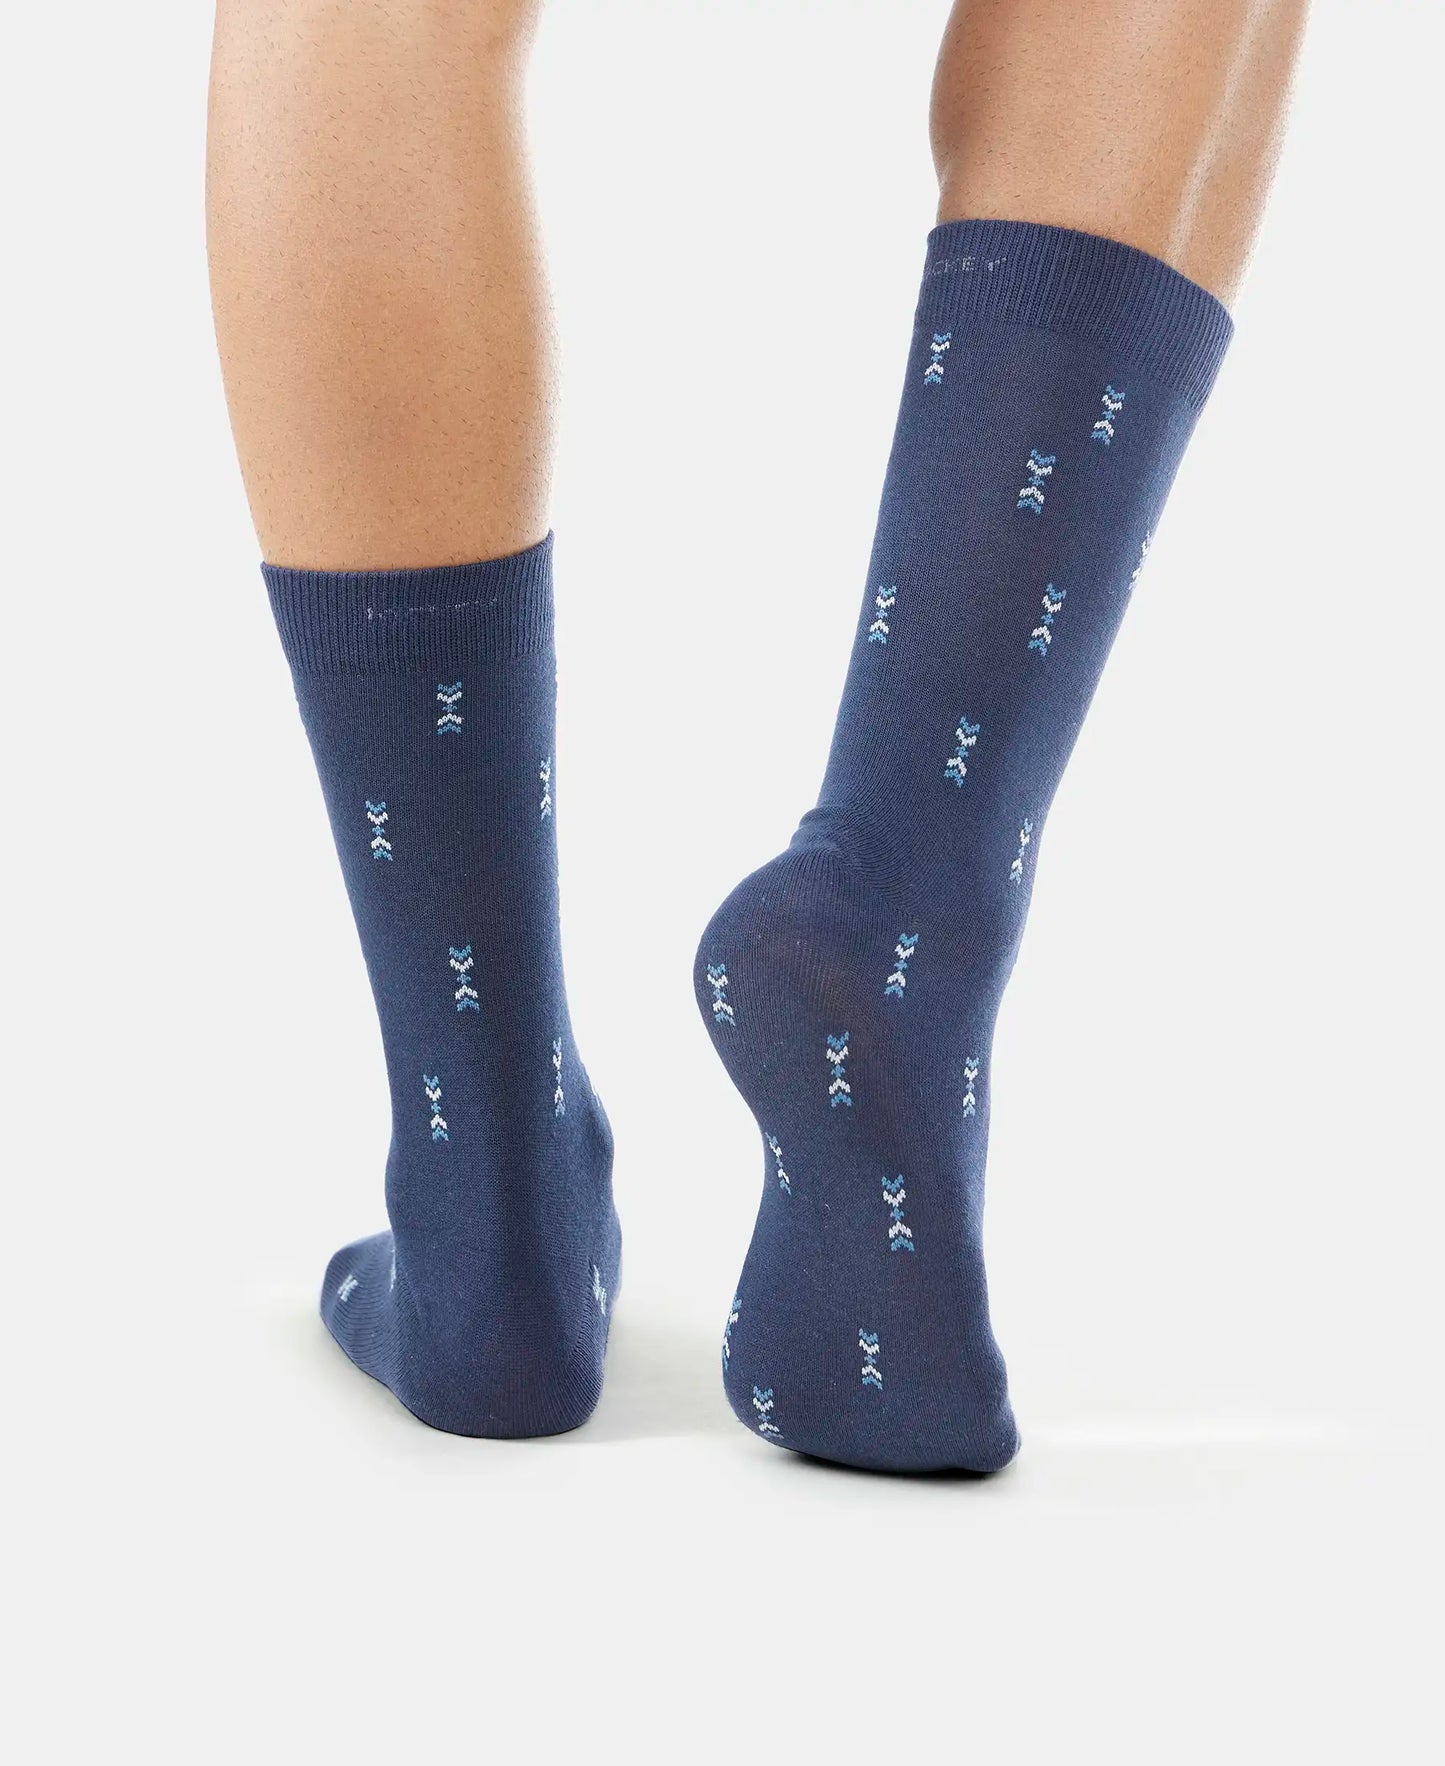 Compact Cotton Crew Length Socks with StayFresh Treatment - Navy-12